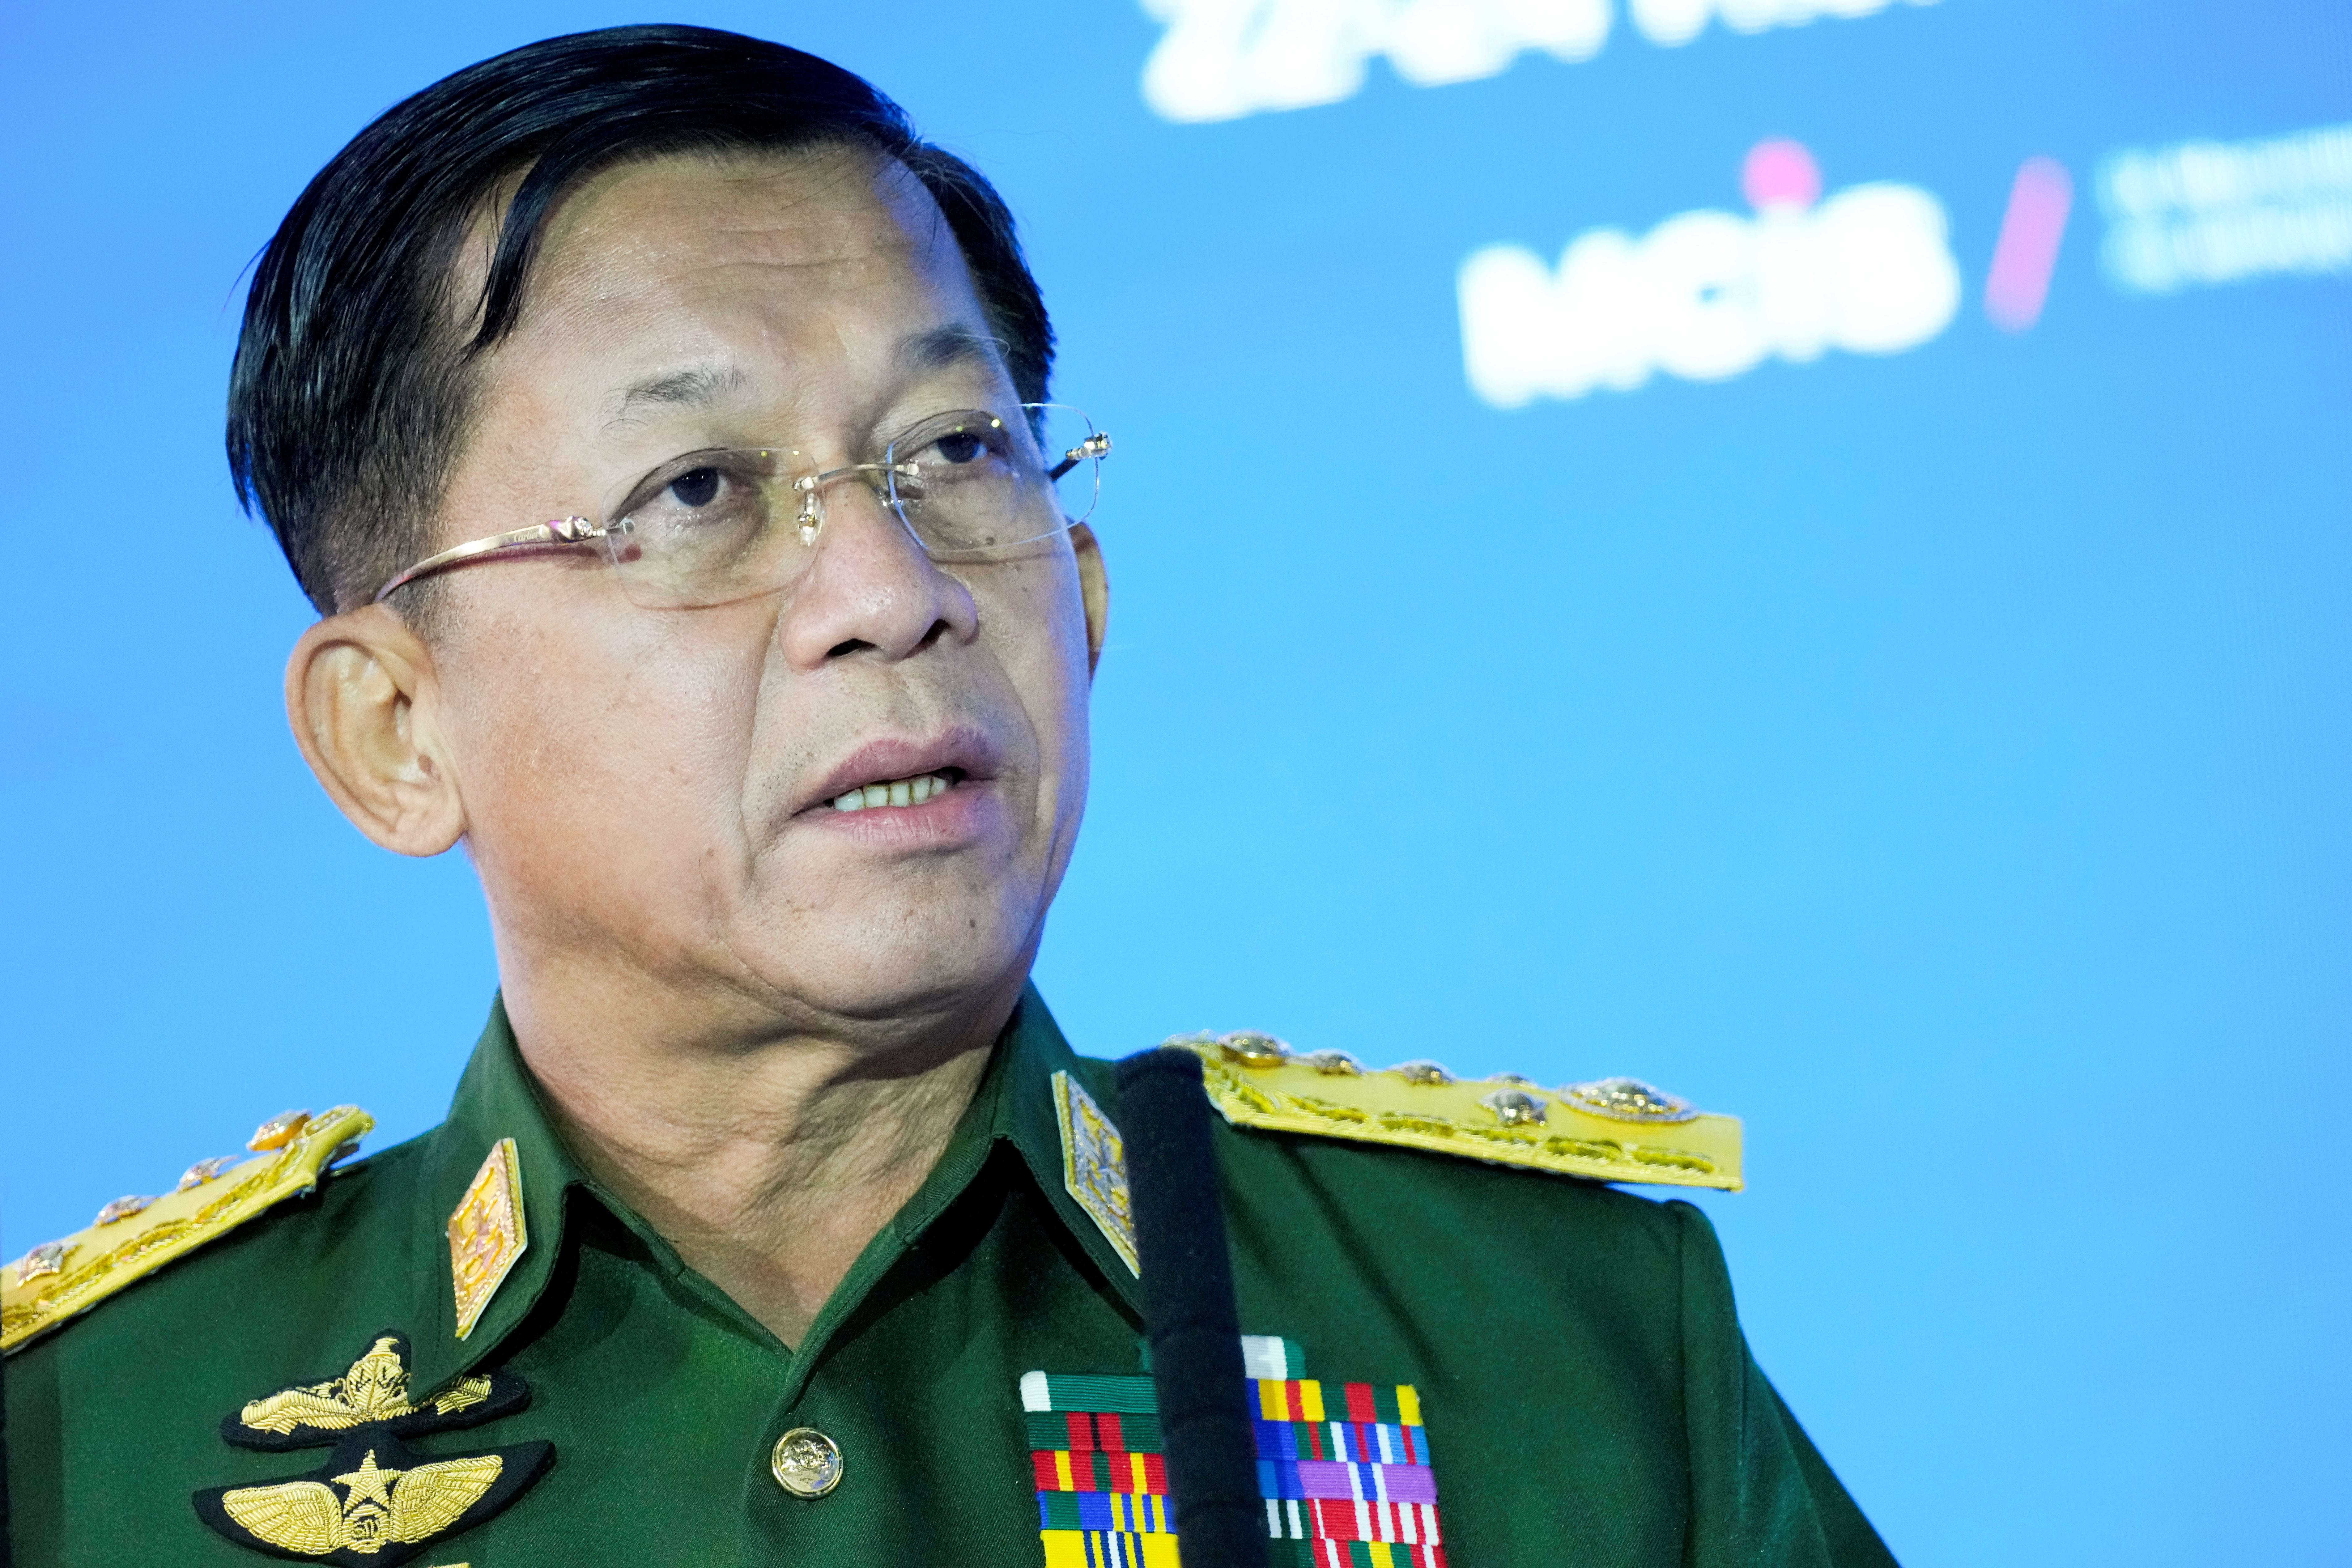 Commander-in-Chief of Myanmar's armed forces, Senior General Min Aung Hlaing delivers his speech at the IX Moscow conference on international security in Moscow, Russia June 23, 2021. Alexander Zemlianichenko/Pool via REUTERS/File Photo